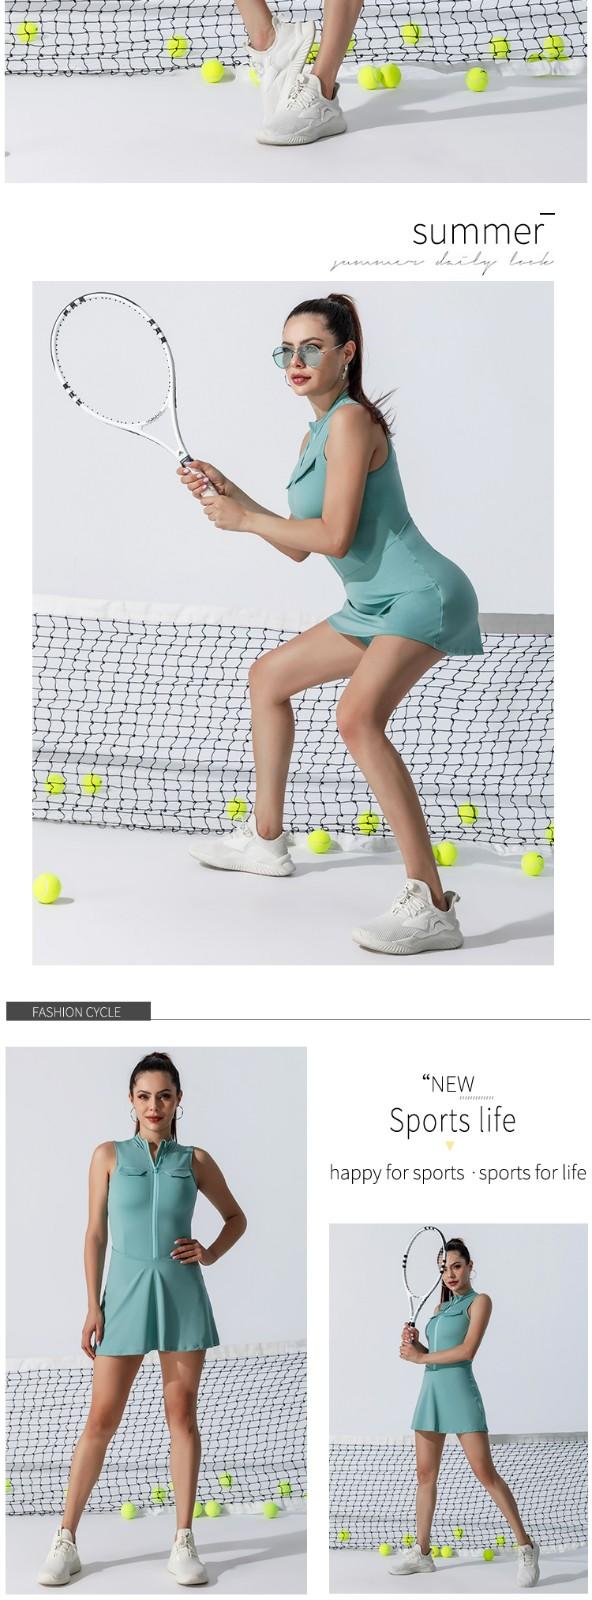 INGOR personalized woman tennis clothes supplier for ladies